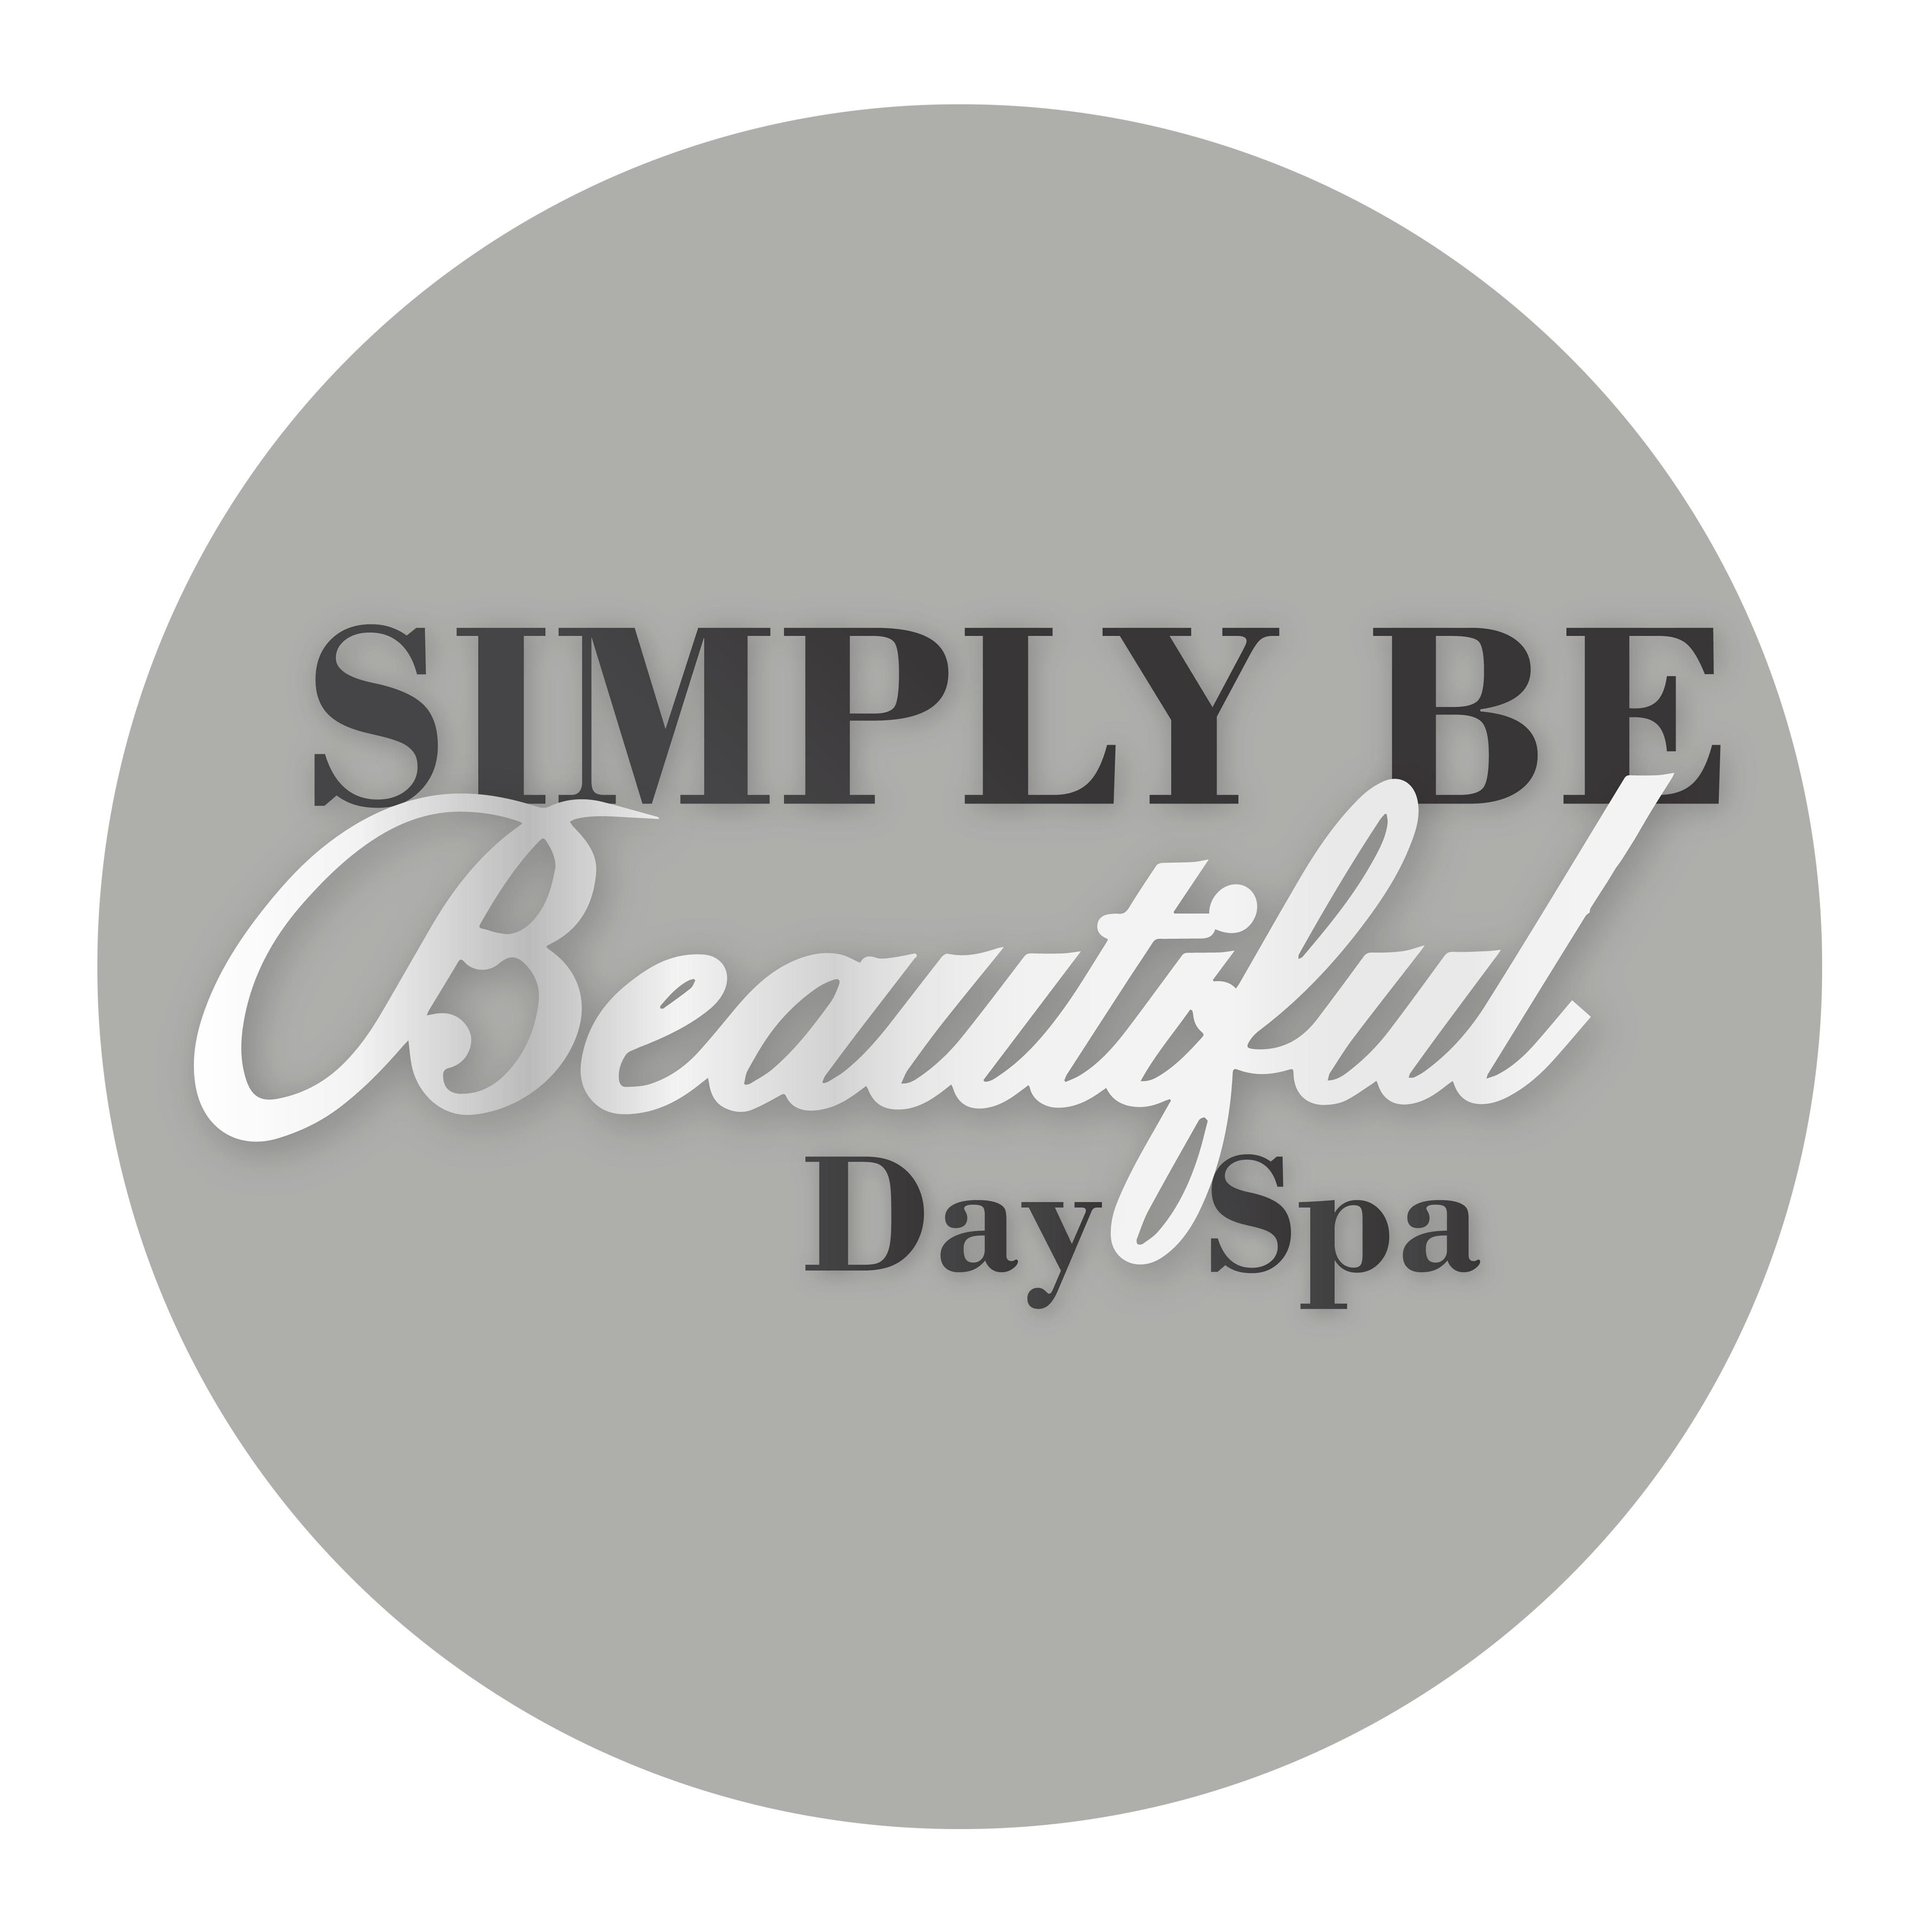 SIMPLY BE Beautiful Day Spa